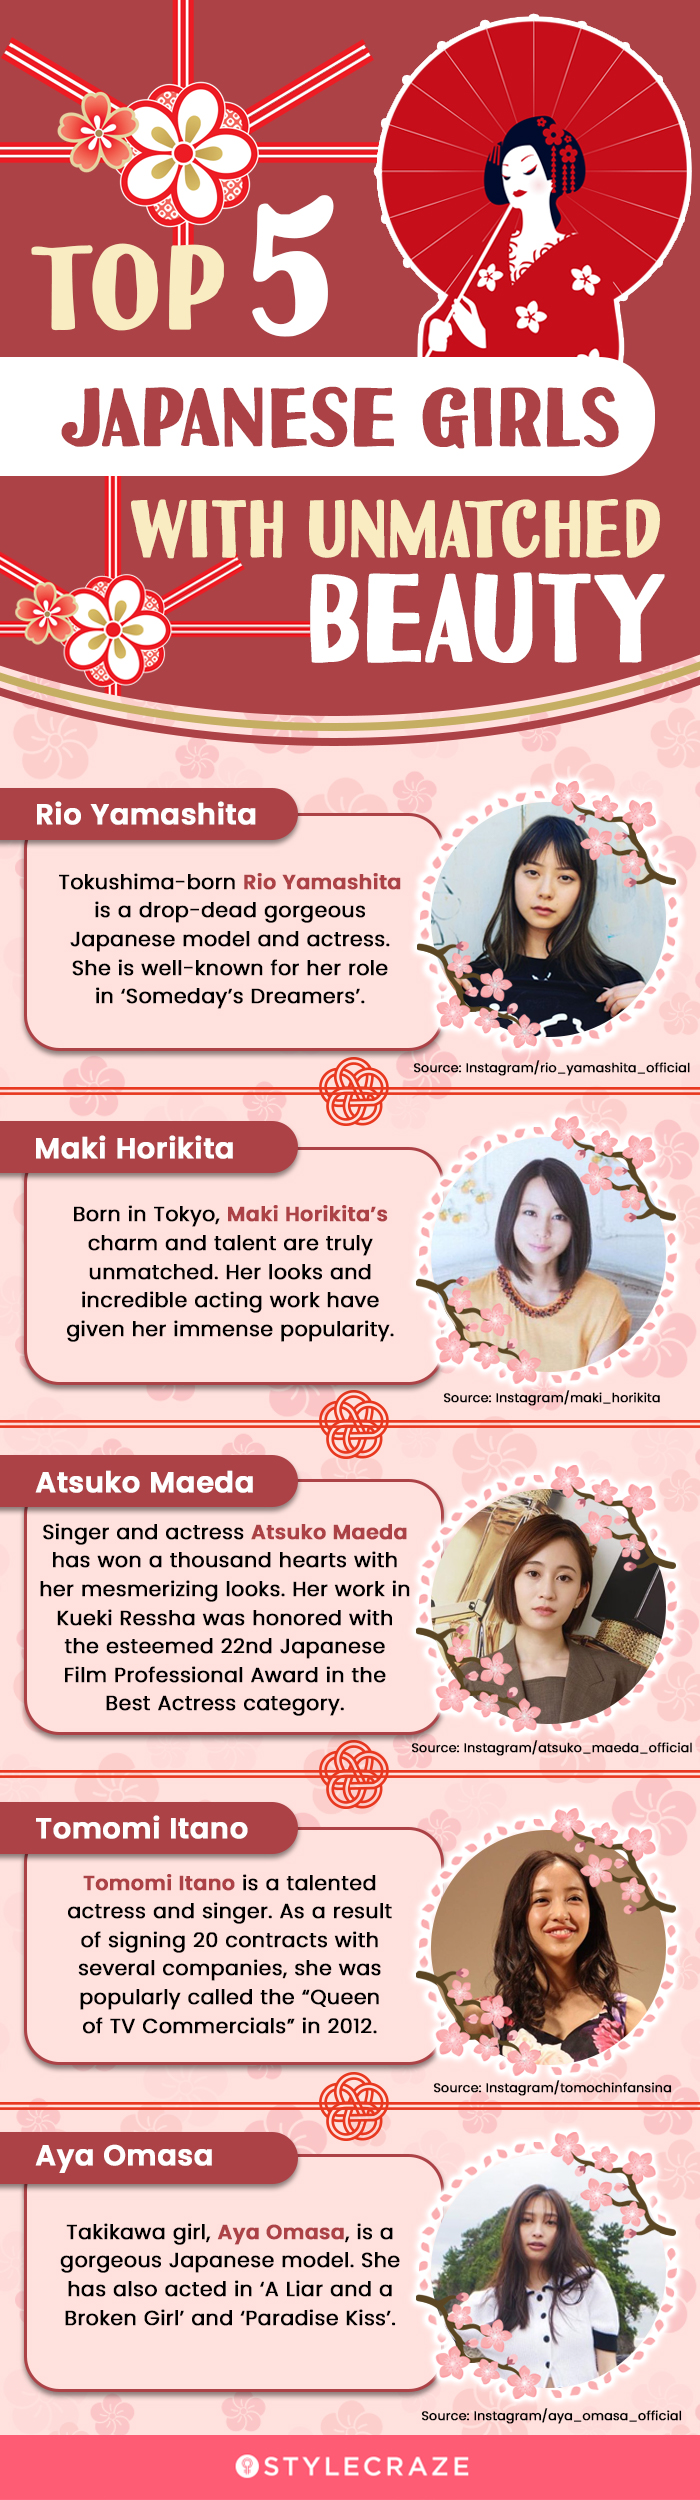 top 5 japanese girls with unmatched beauty (infographic)